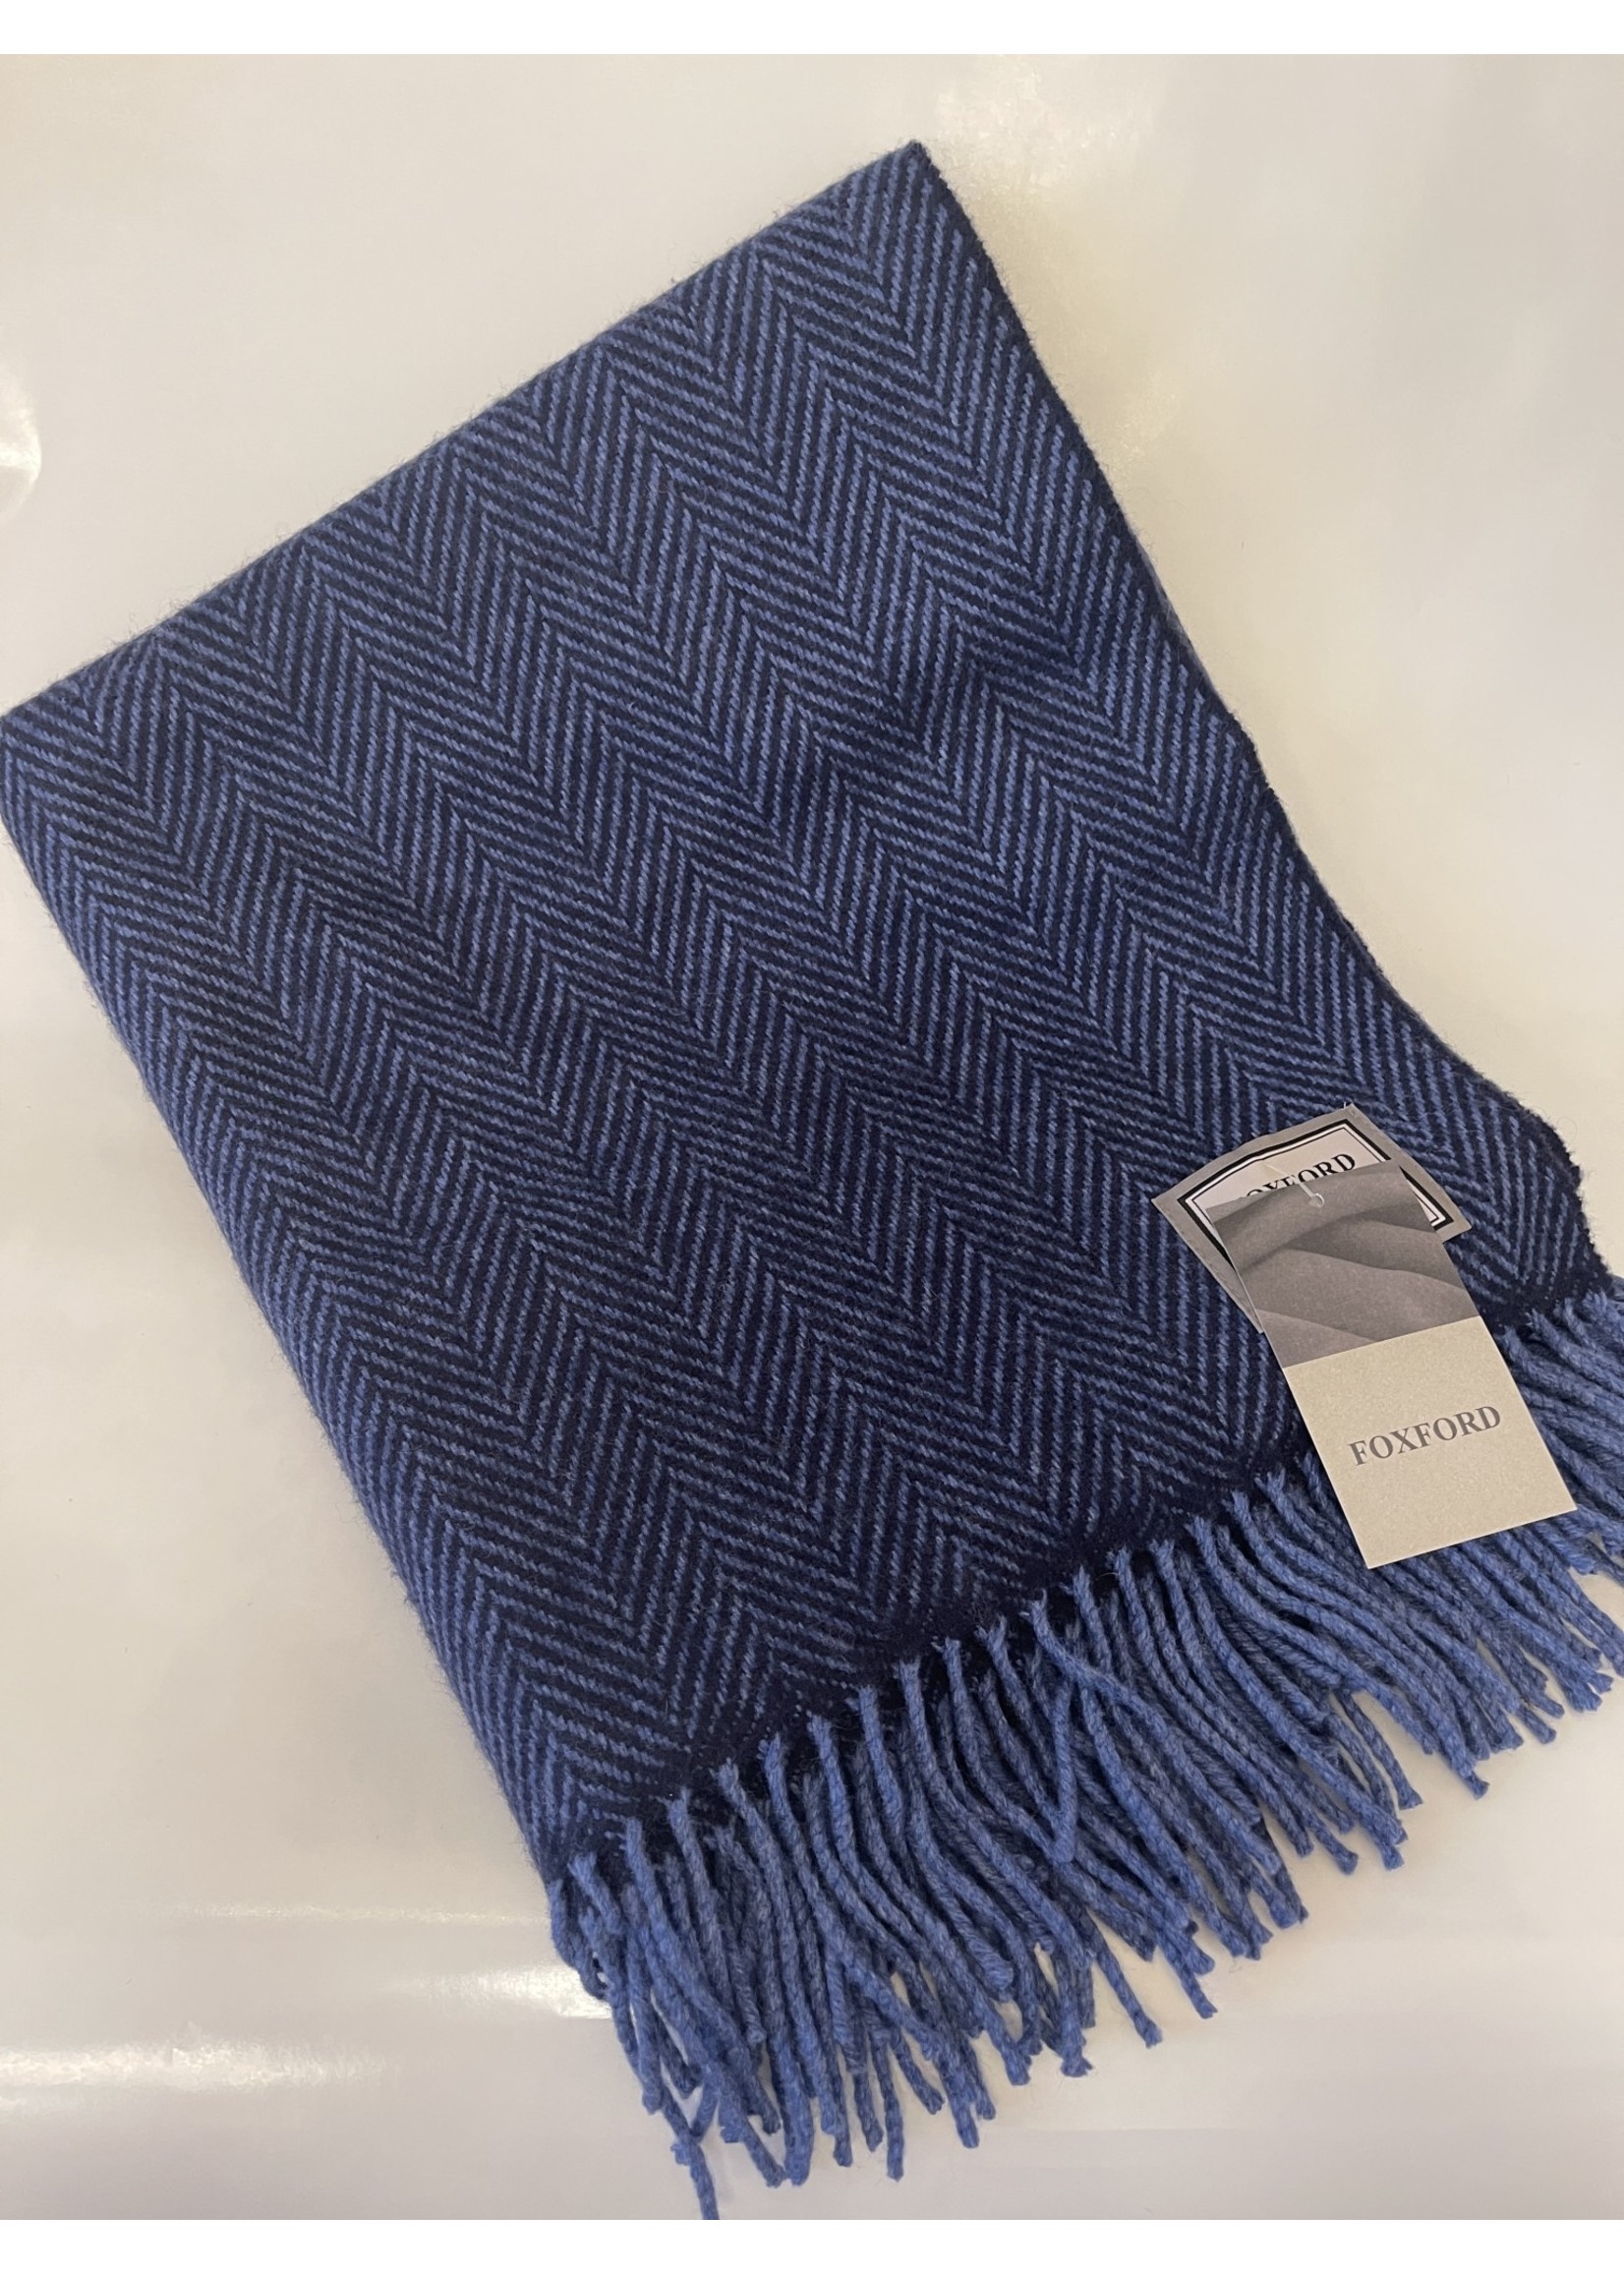 Foxford Mills Foxford Mills - Cashmere & Wool Blanket- The Cong